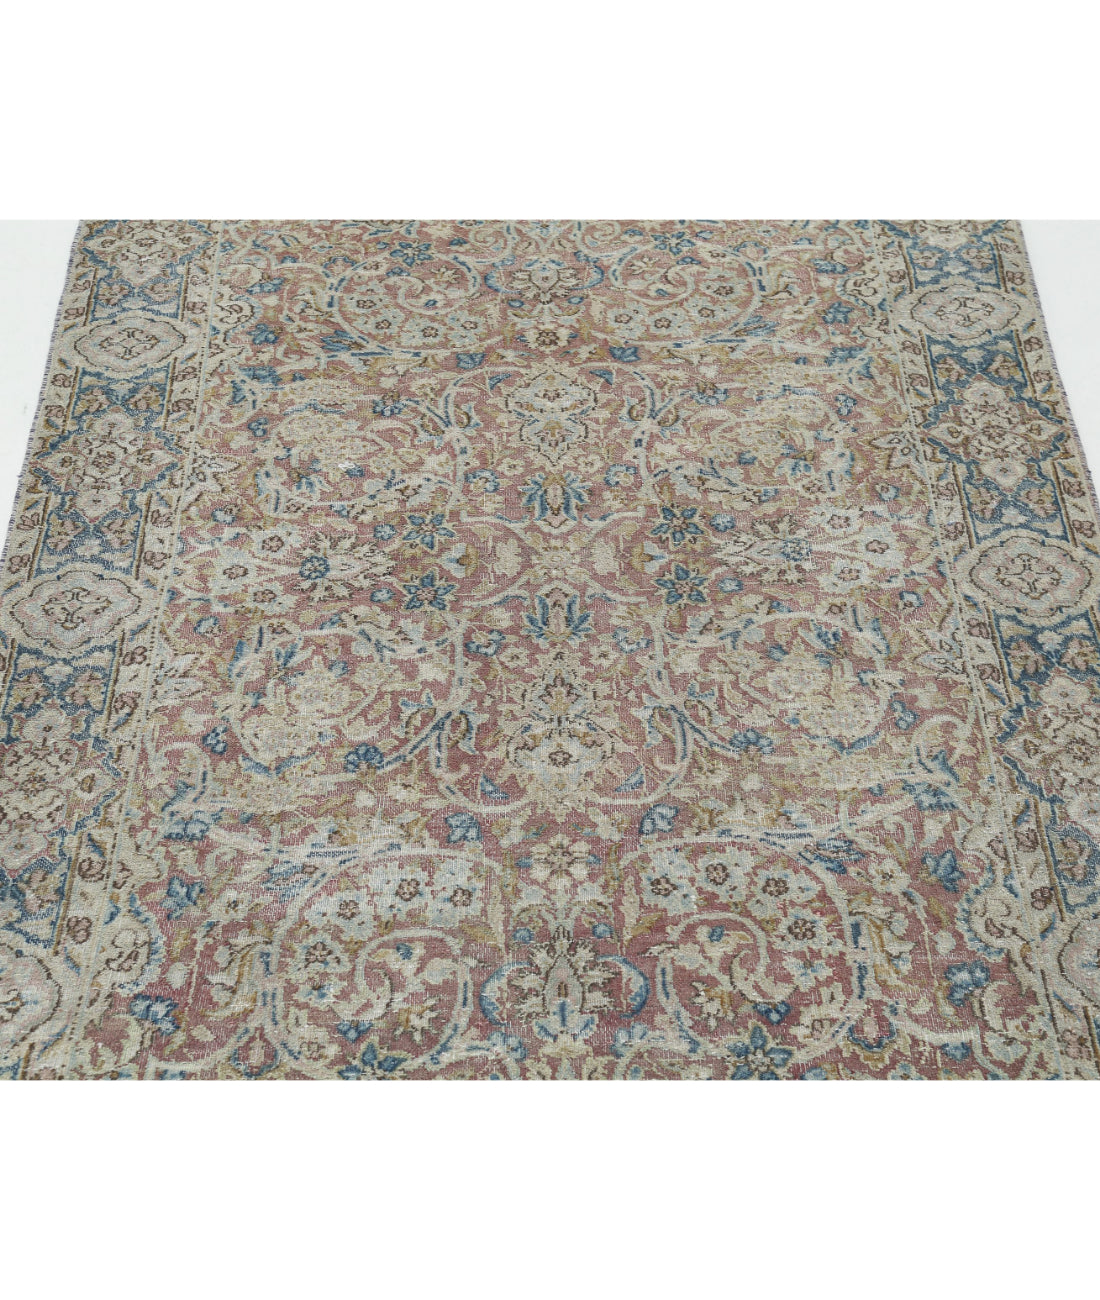 Hand Knotted Antique Persian Kerman Wool Rug - 3'8'' x 9'6'' 3'8'' x 9'6'' (110 X 285) / Pink / Blue